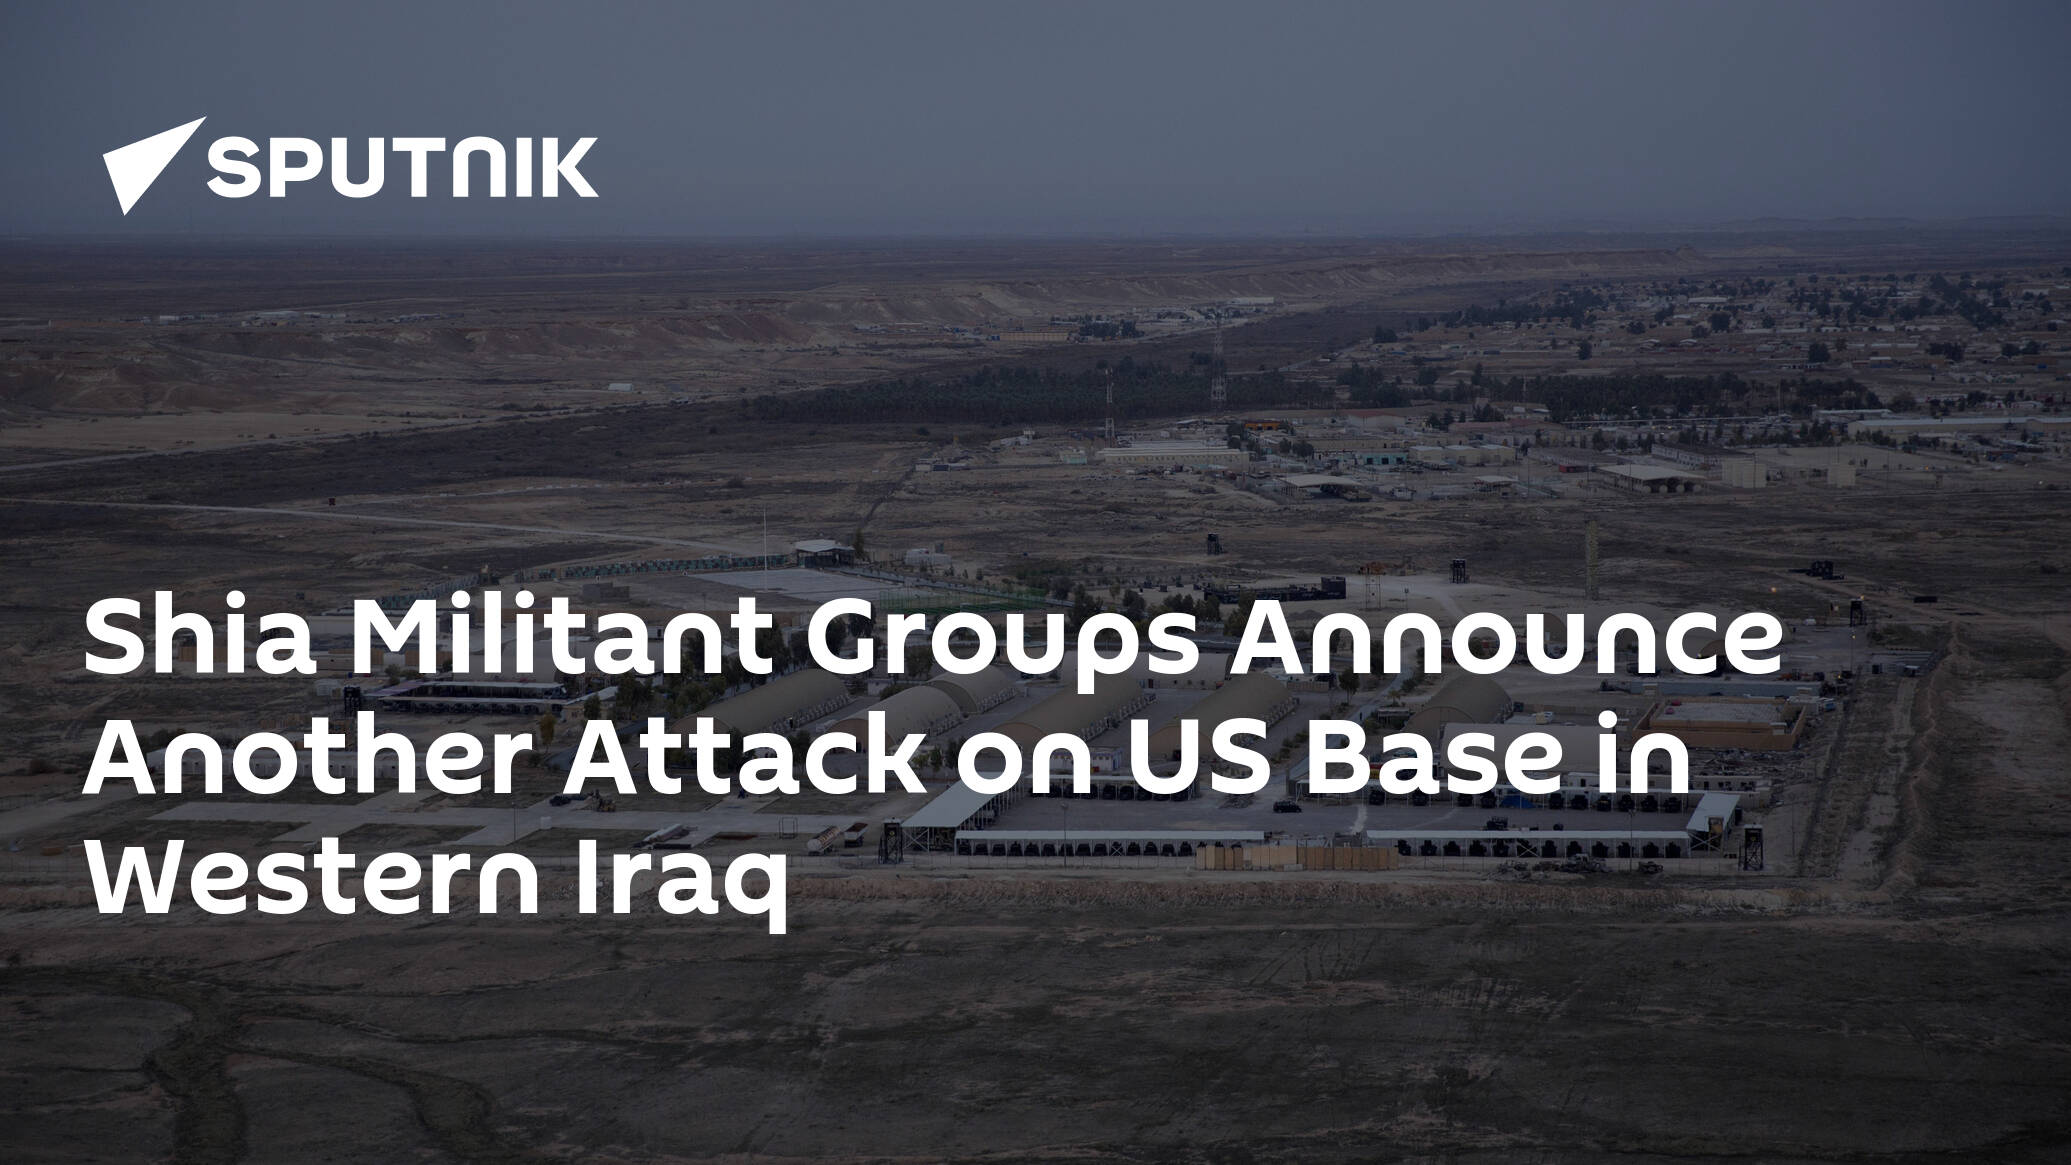 Shia Militant Groups Announce Another Attack on US Base in Western Iraq